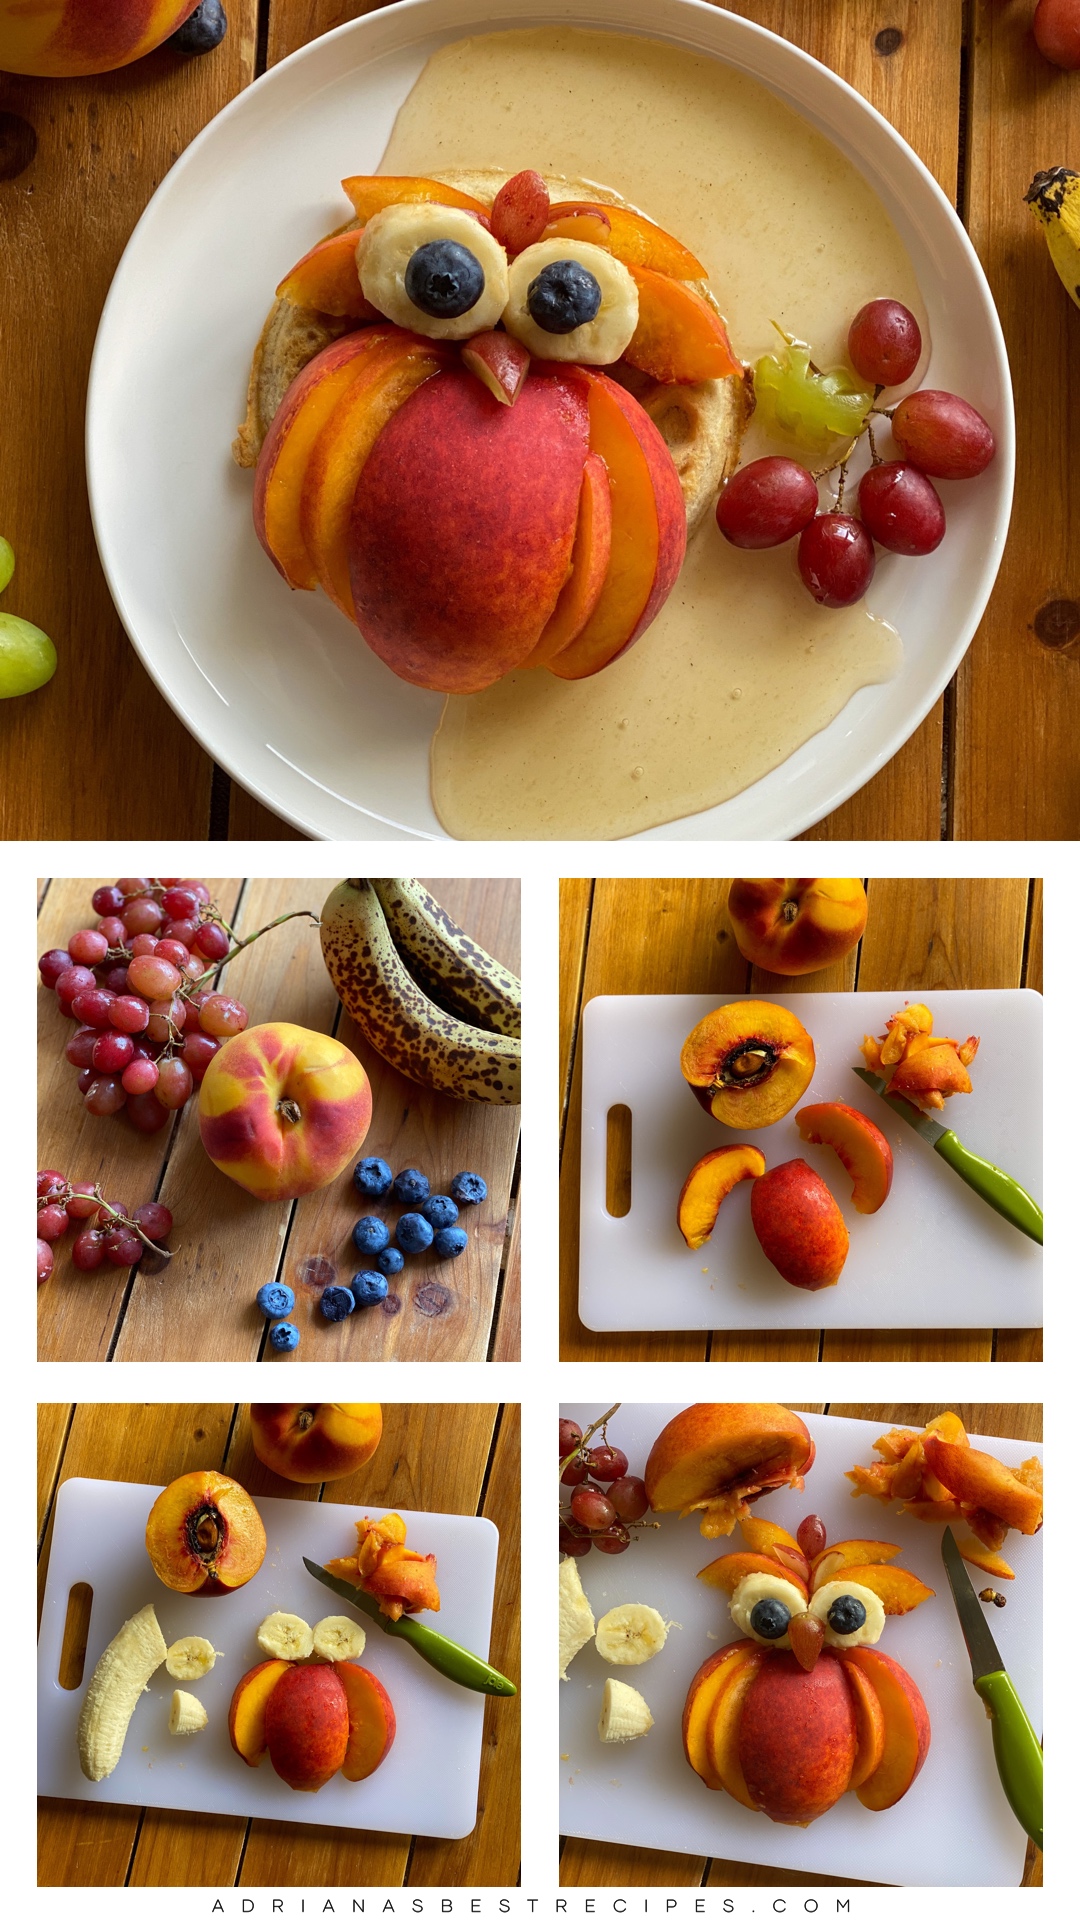 Step by step on how to make the peachy owl waffle